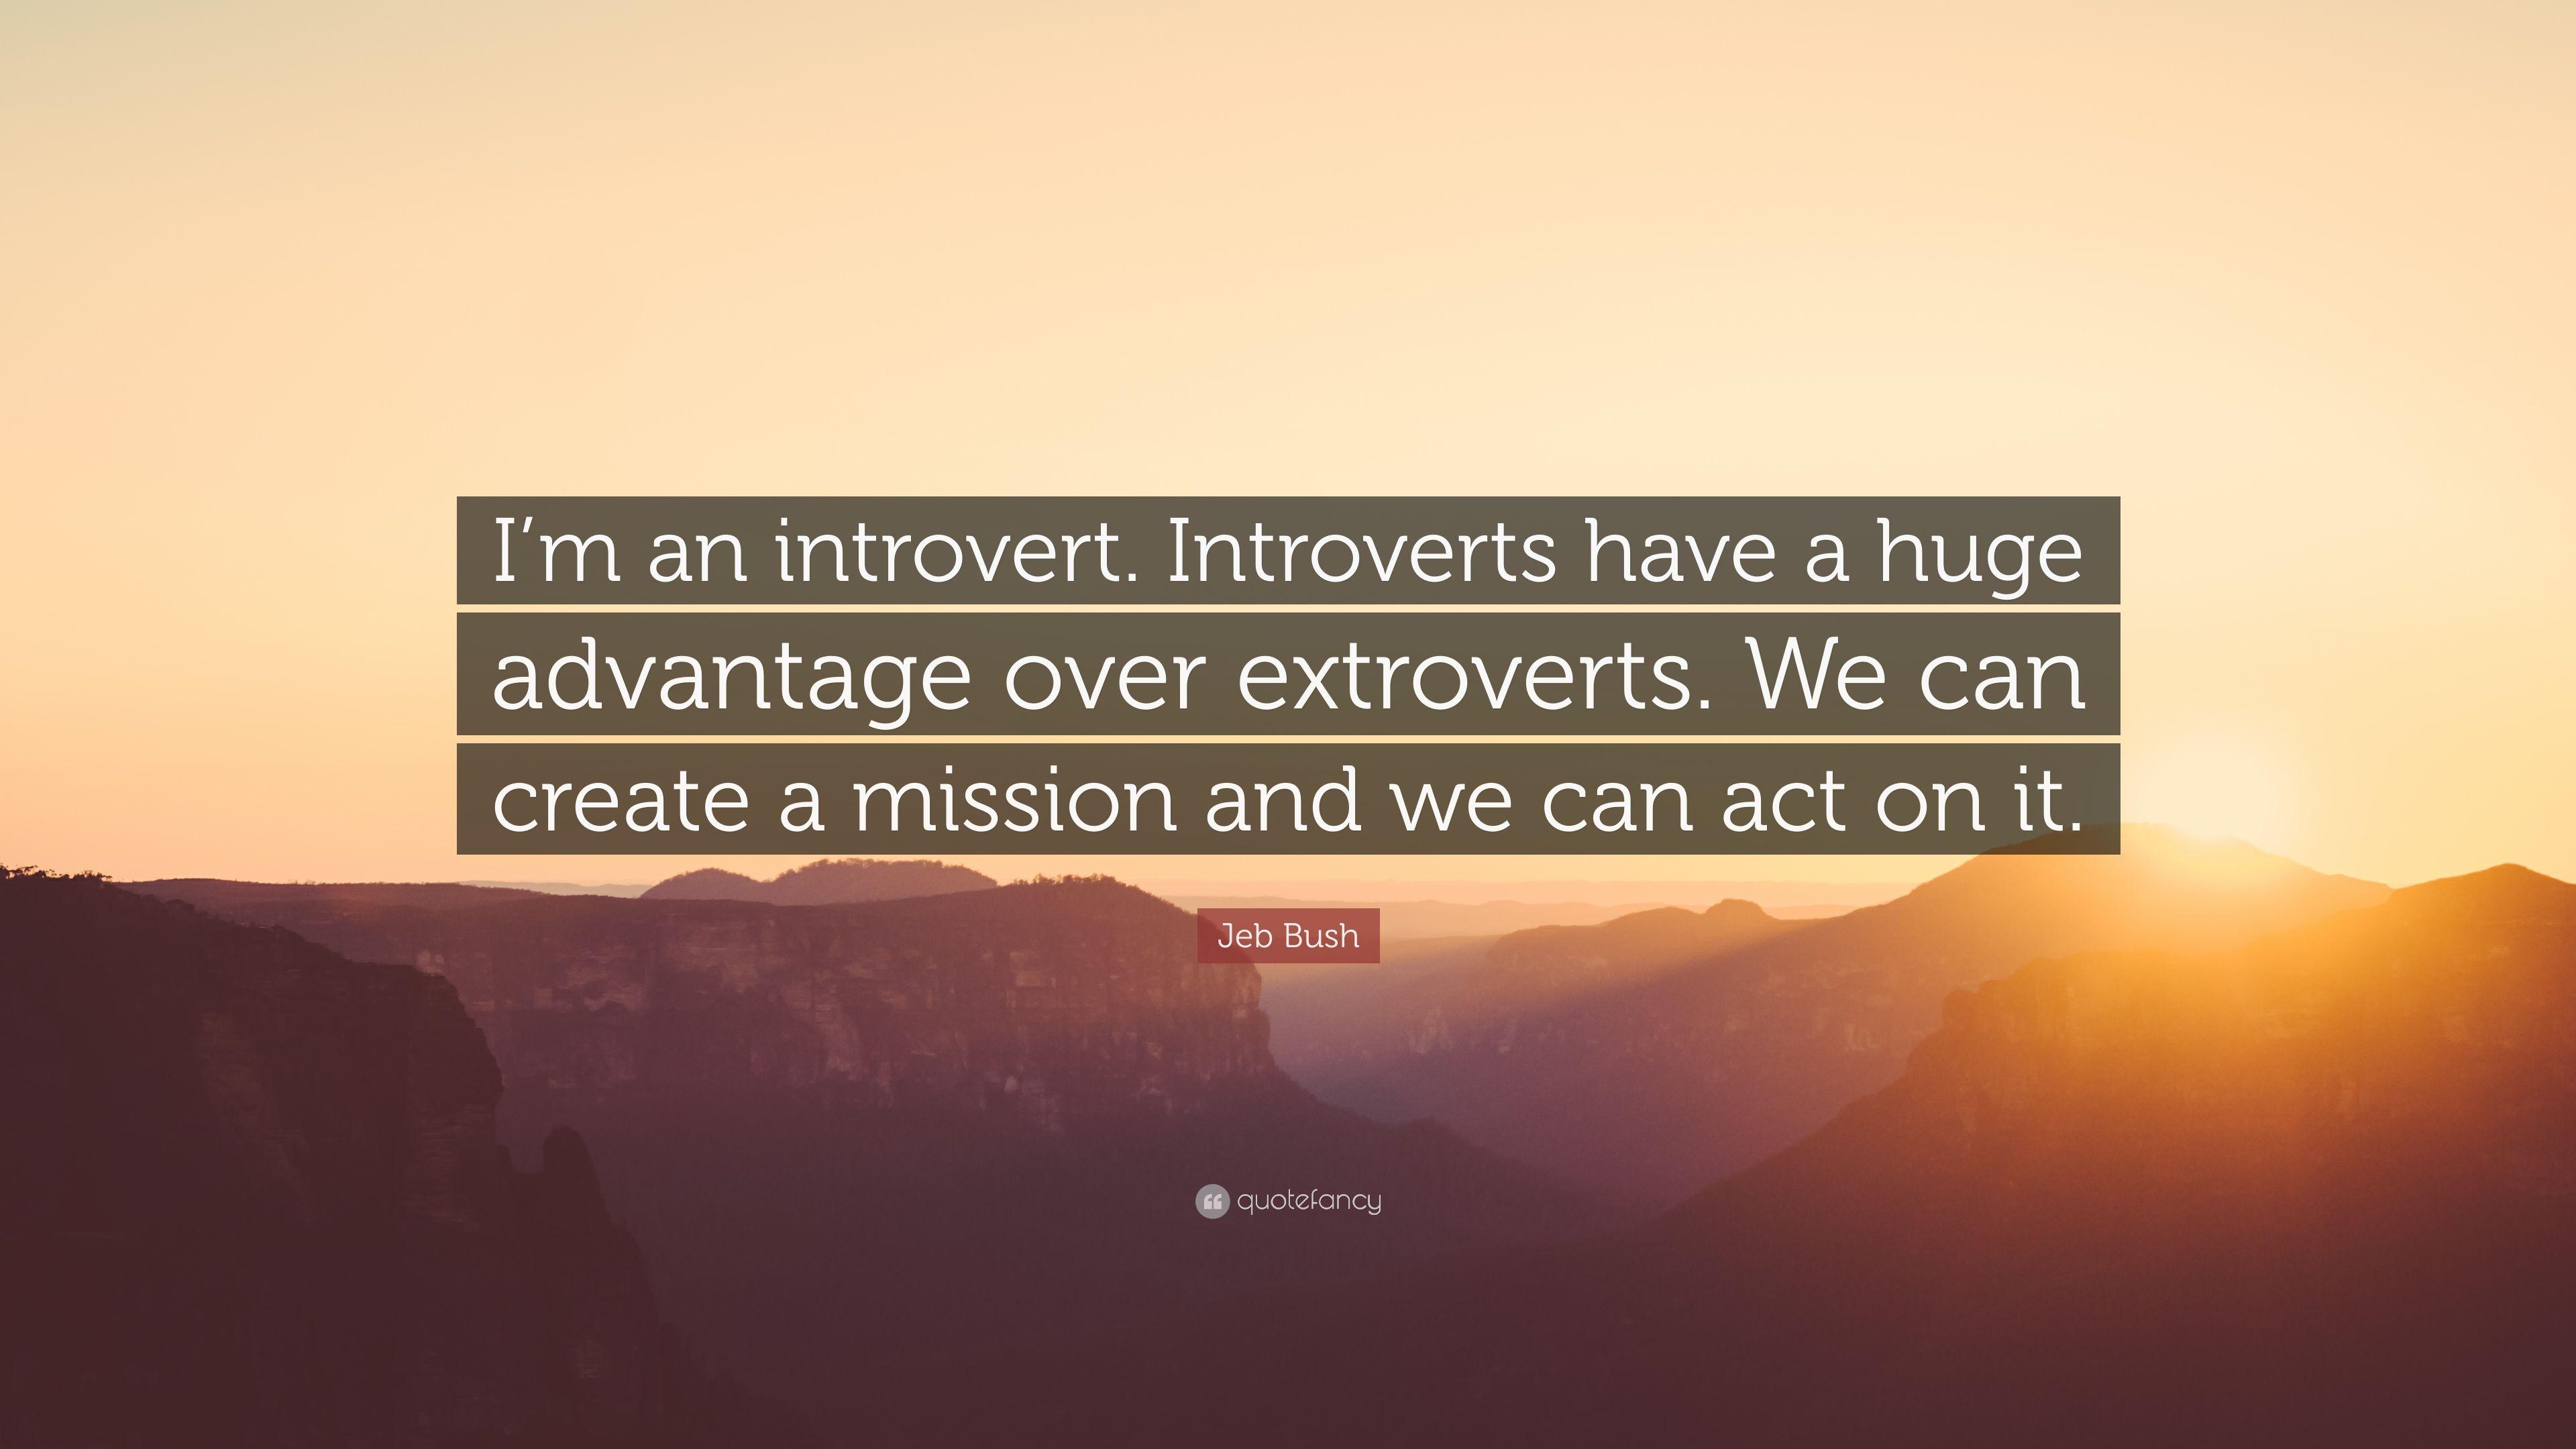 Jeb Bush Quote: “I'm an introvert. Introverts have a huge advantage